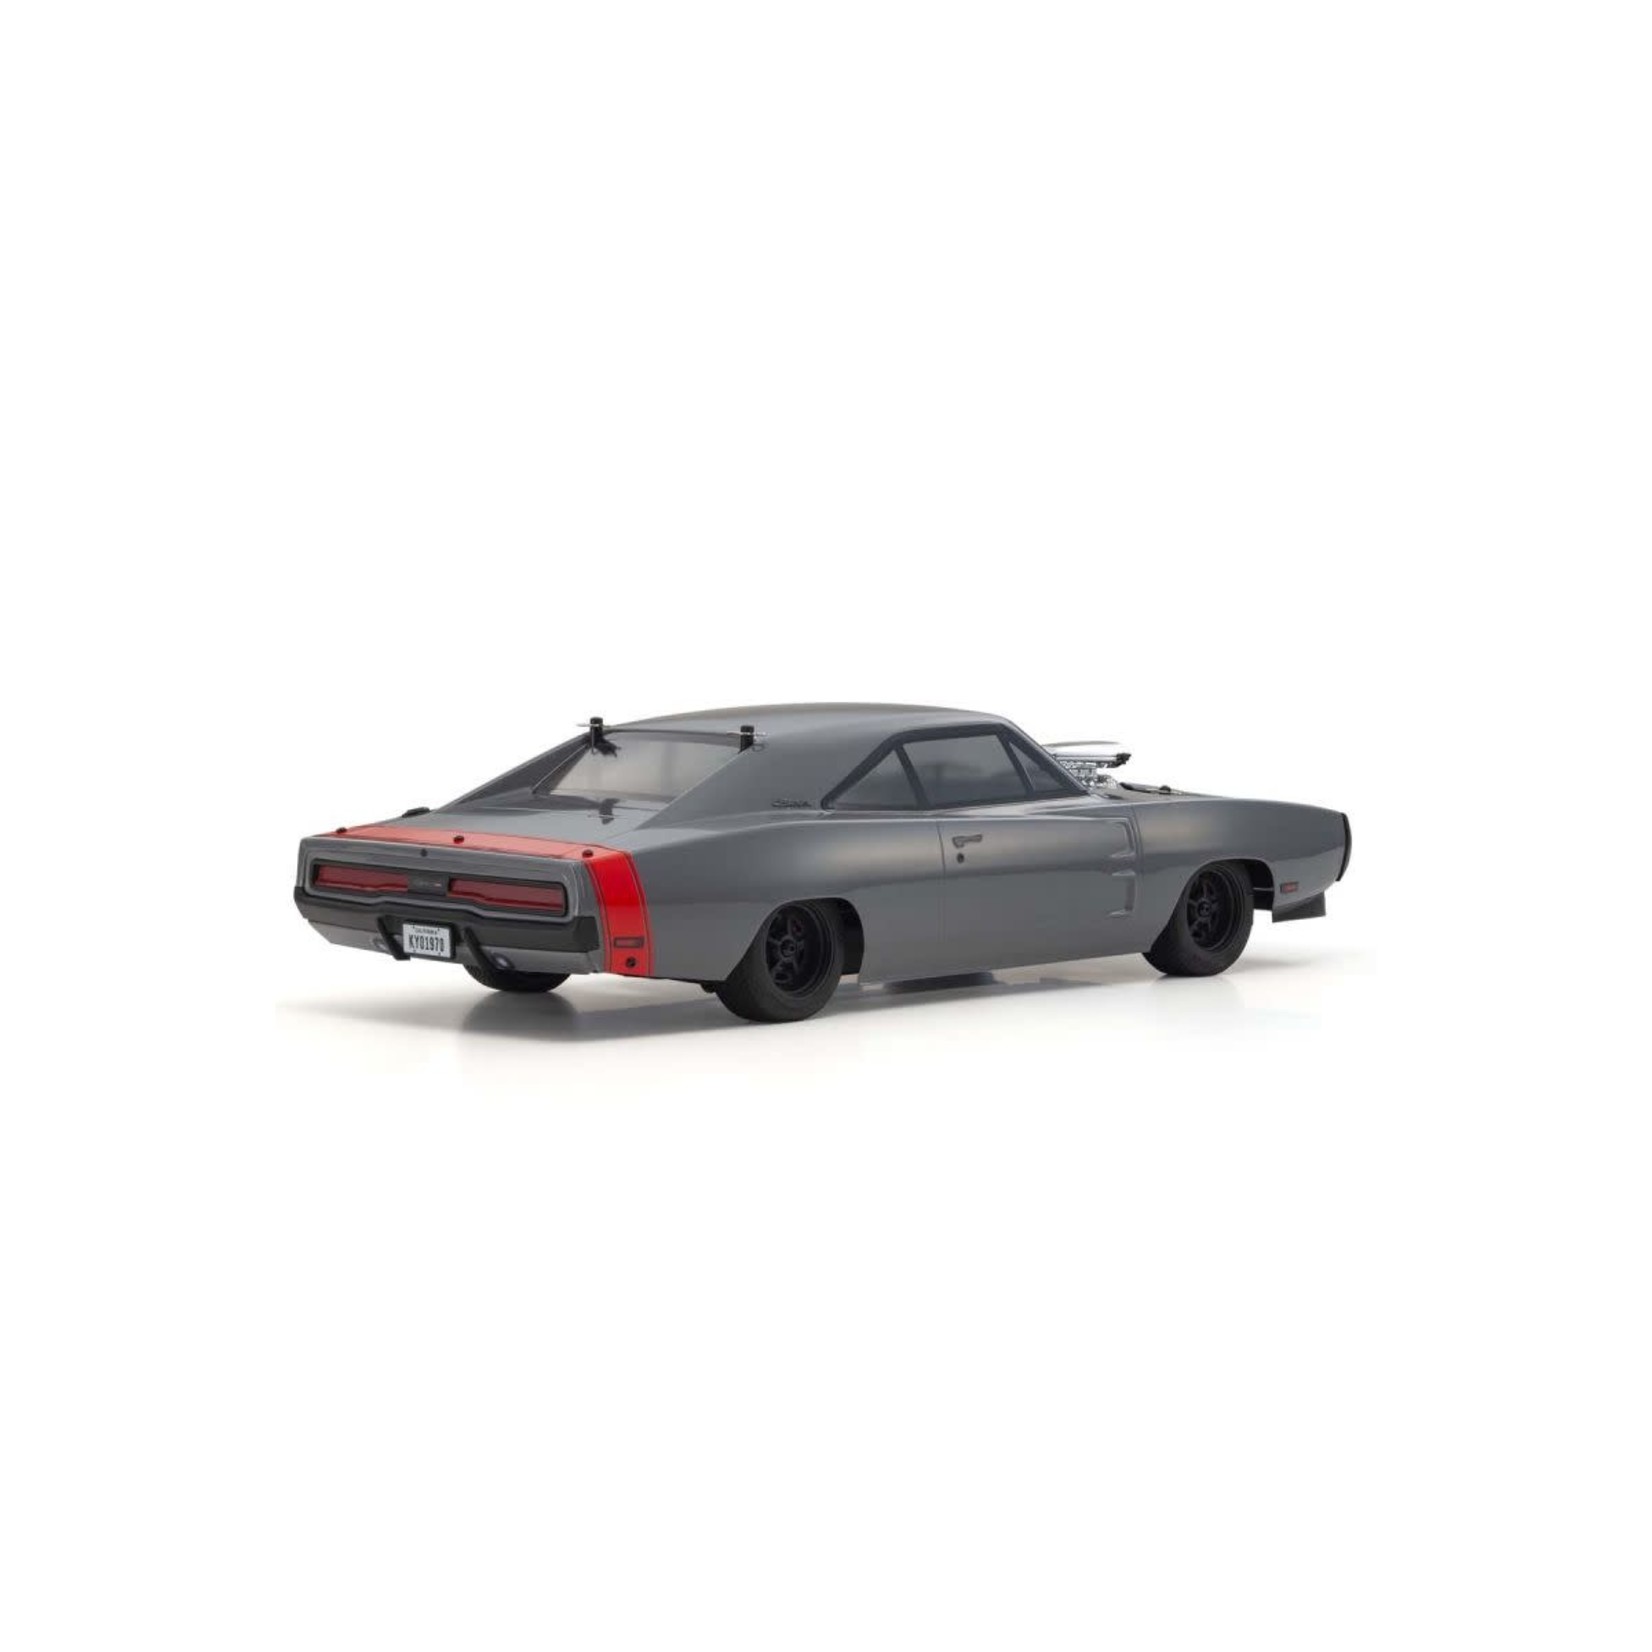 KYOSHO 1/10 EP 4WD RTR Fazer Mk2 1970 Dodge Charger Super Charged VE Gray